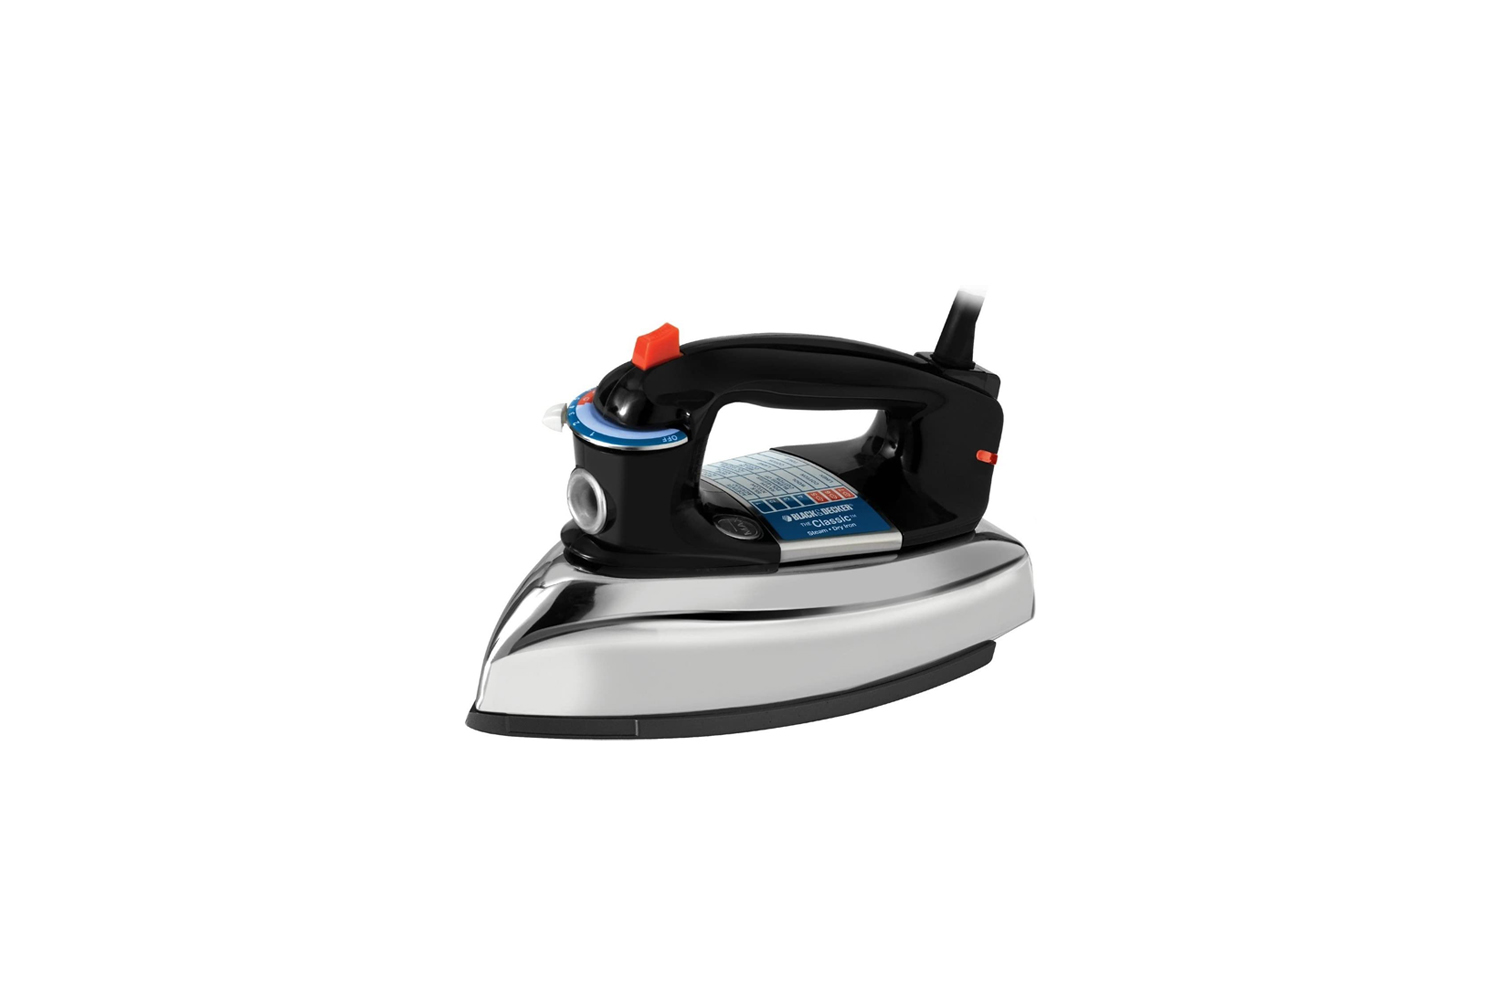 looking for a basic iron without bells and whistles? the black + decker classic 17